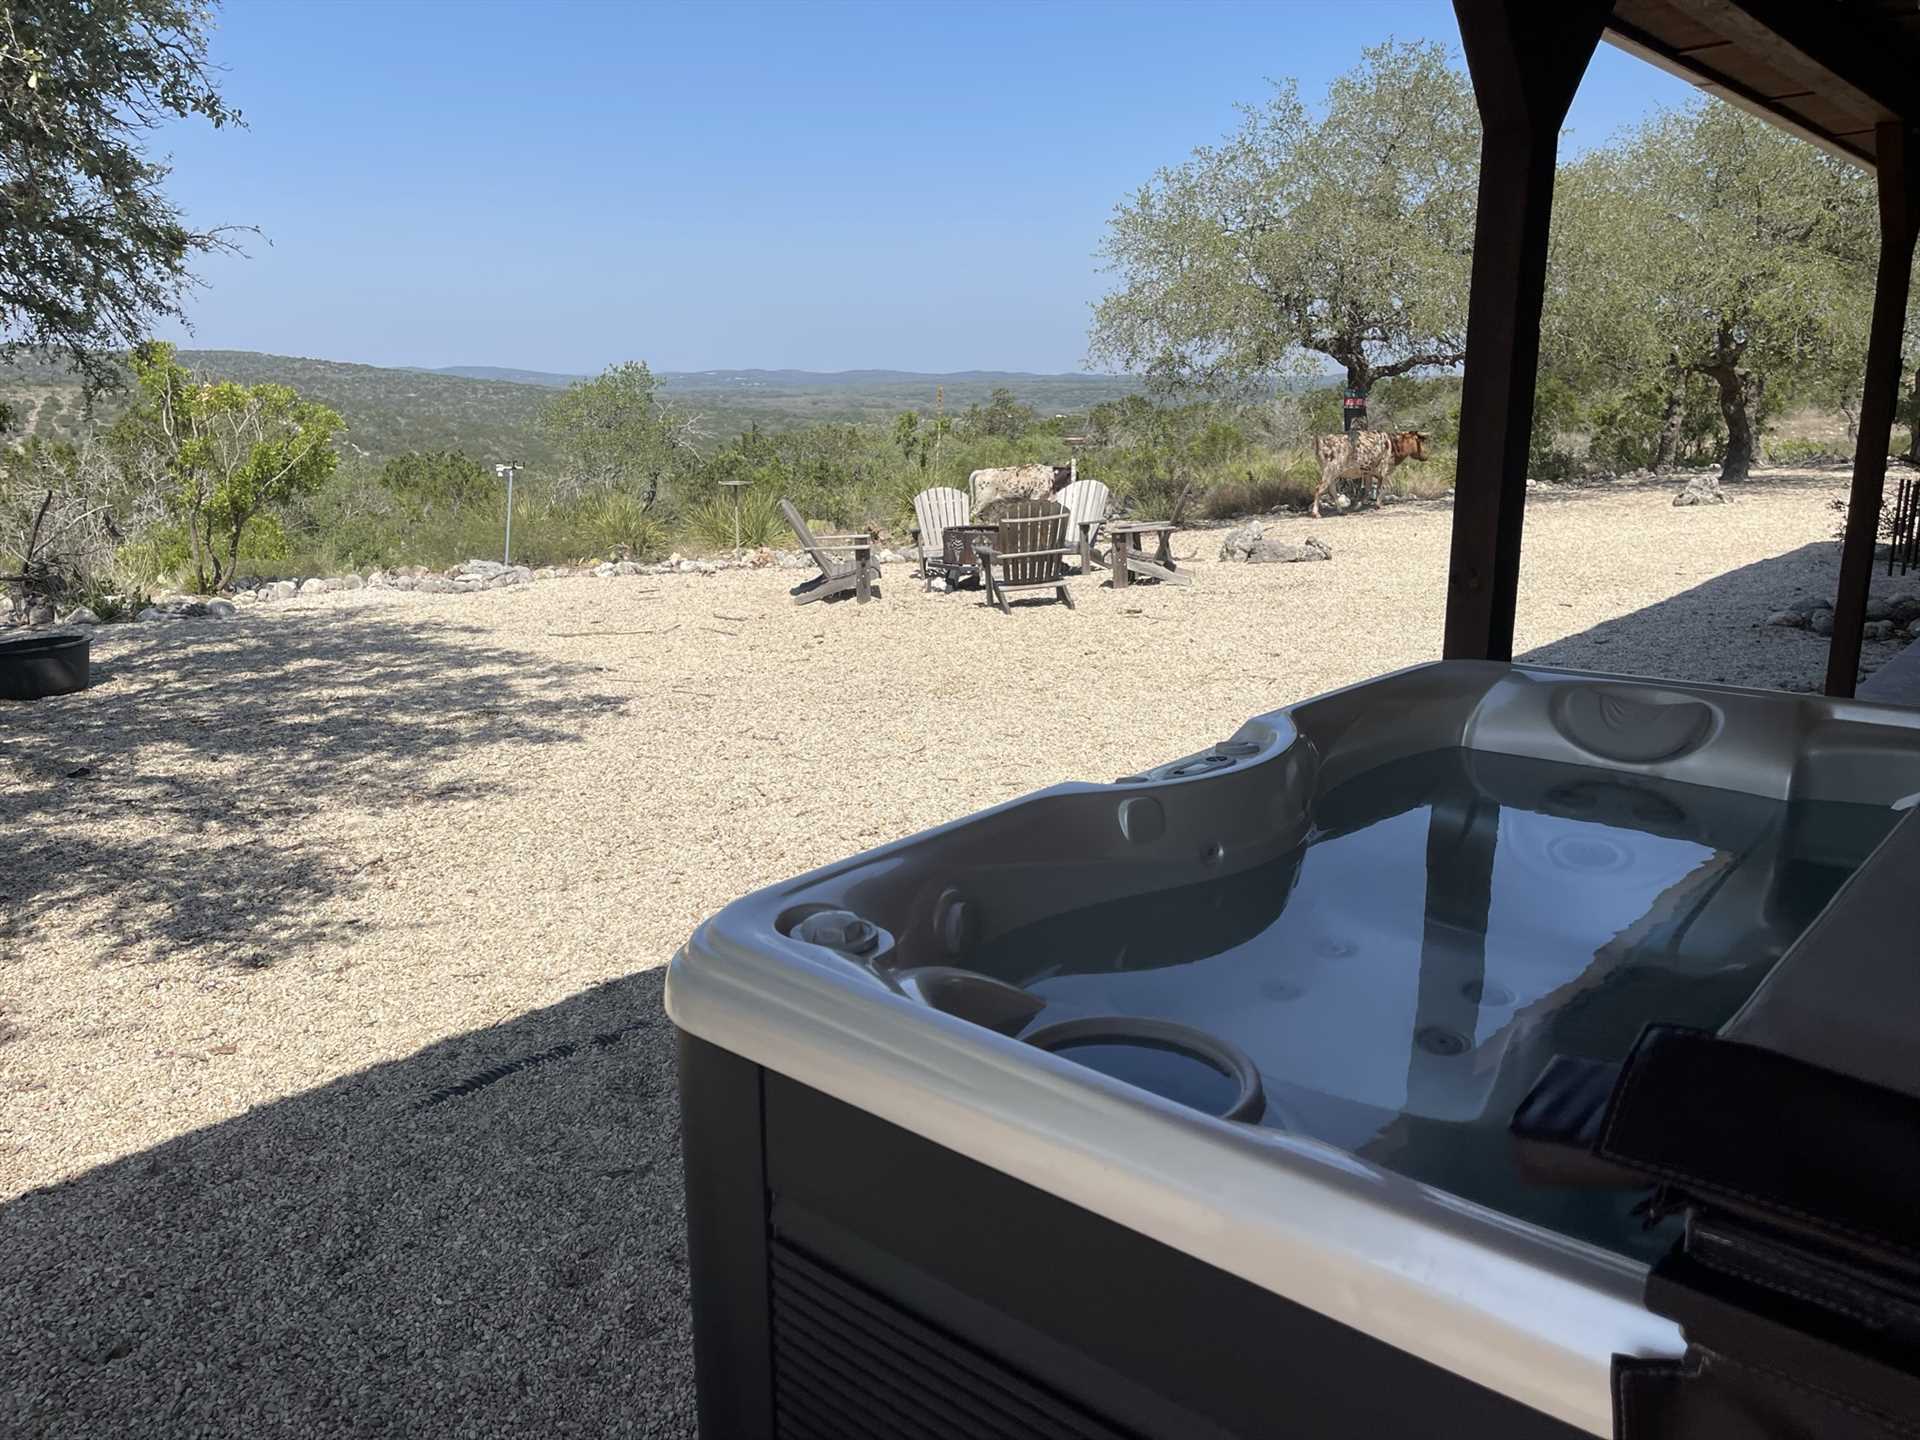                                                 The only thing that could make this Hill Country view even better is to enjoy it from a warm and soothing hot tub!